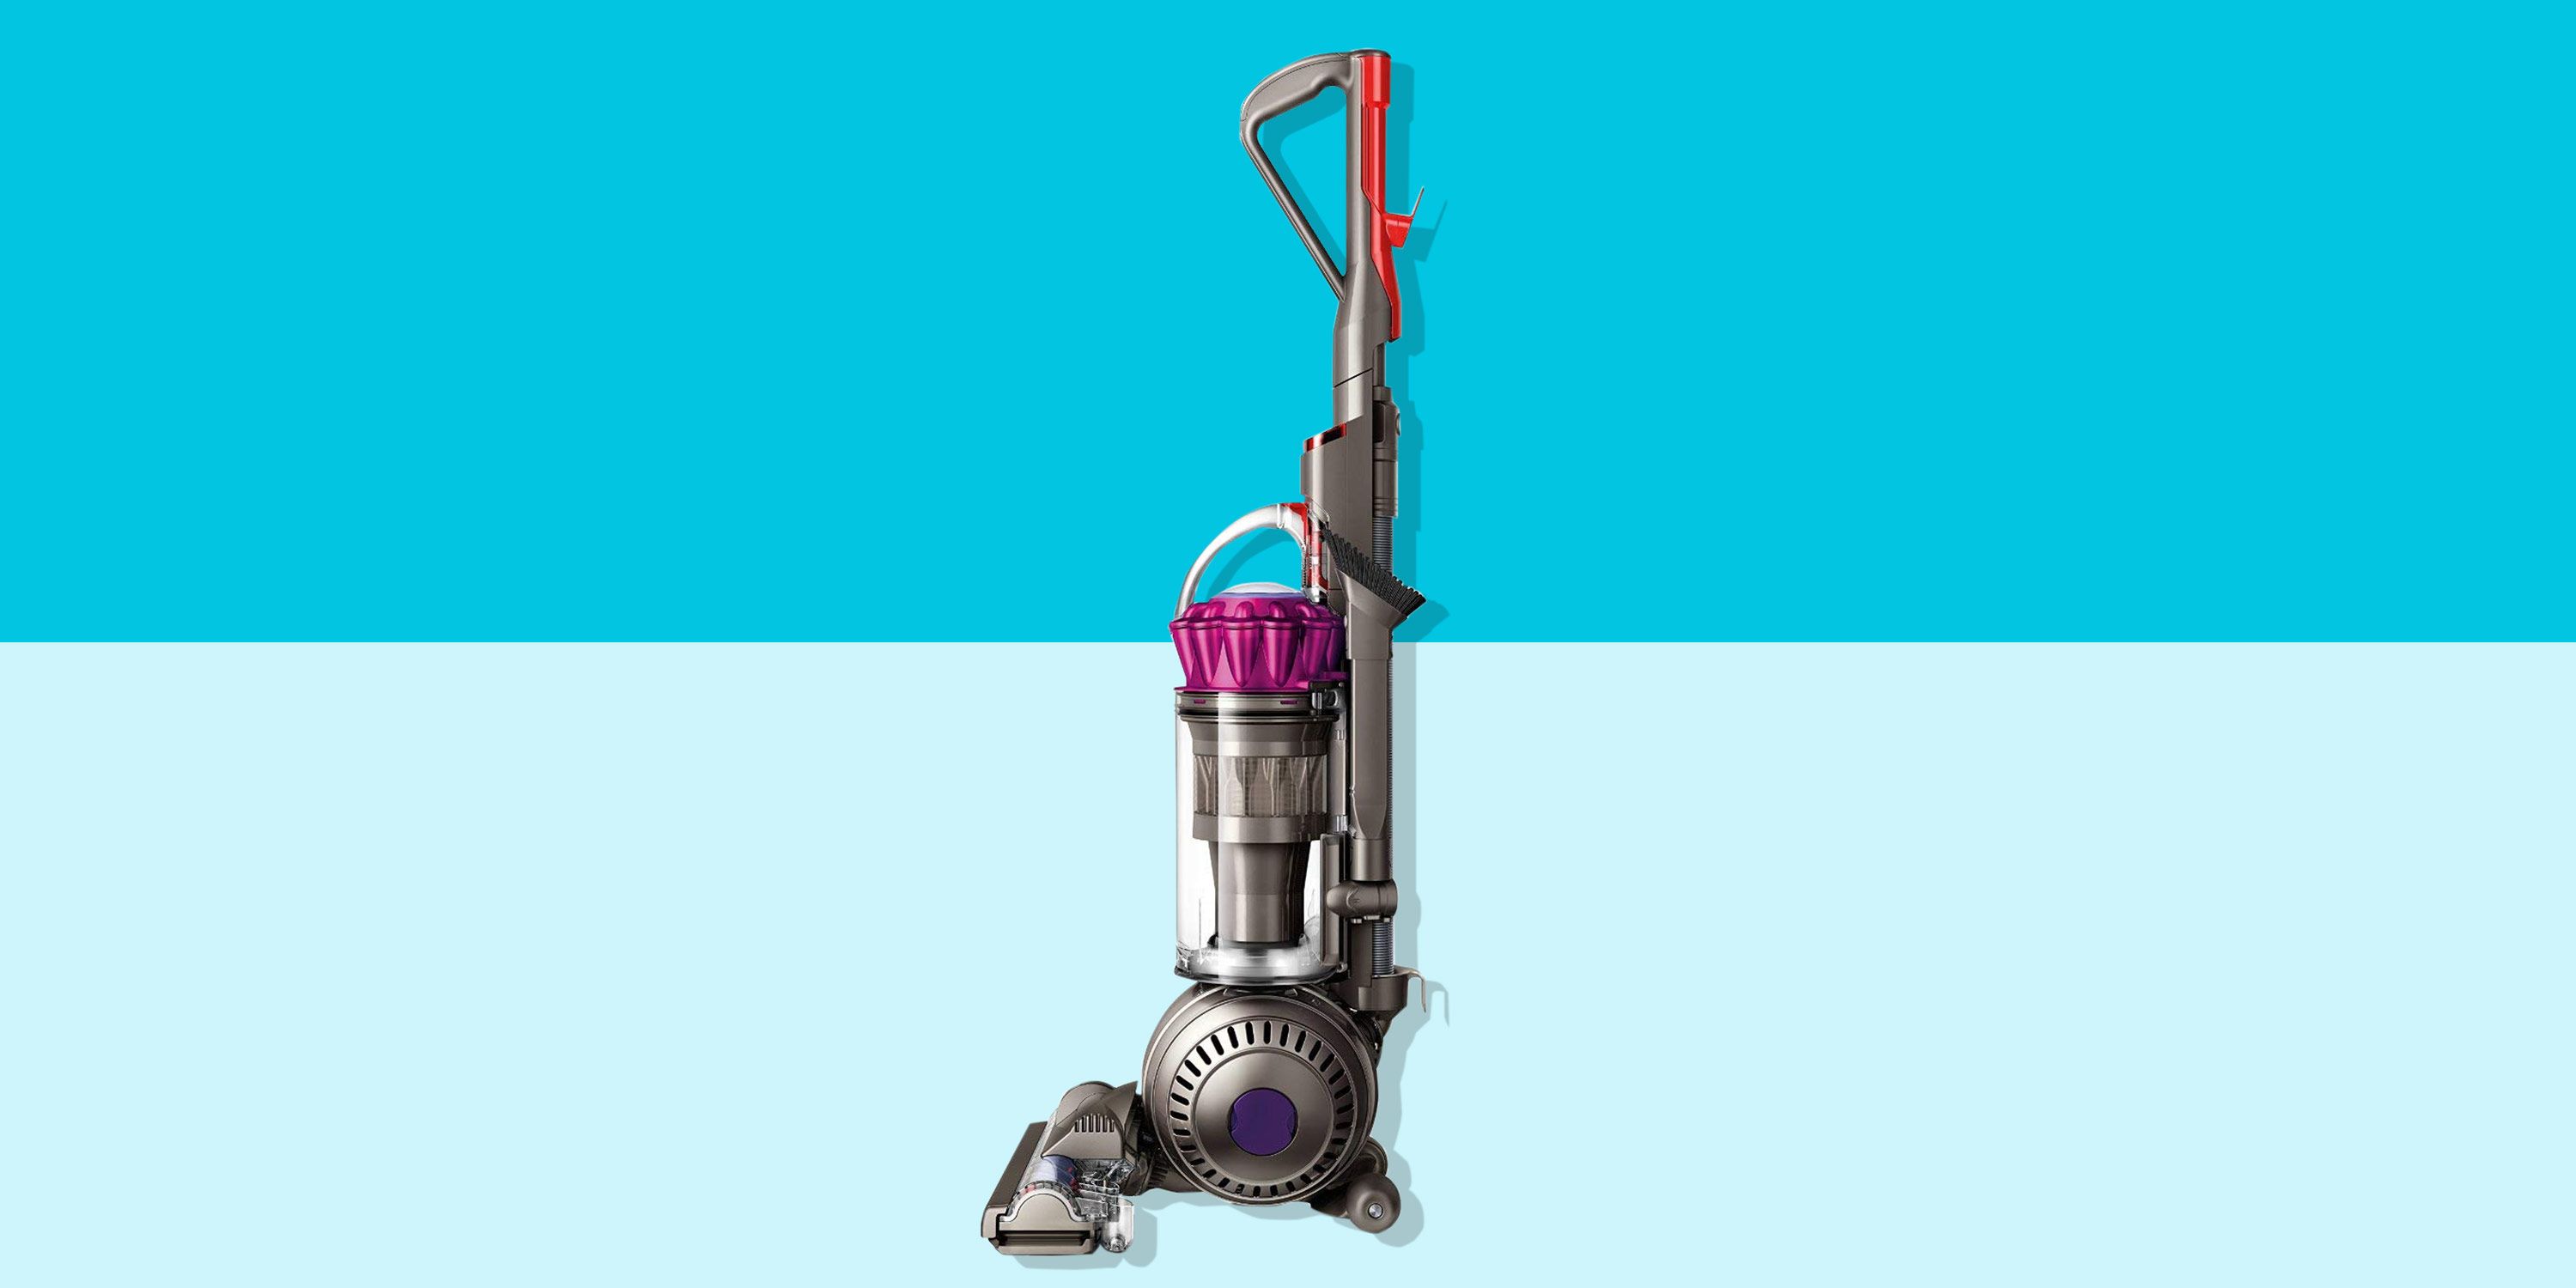 Dyson Upright Vacuum Certified Refurbished Sale on Amazon | The Strategist